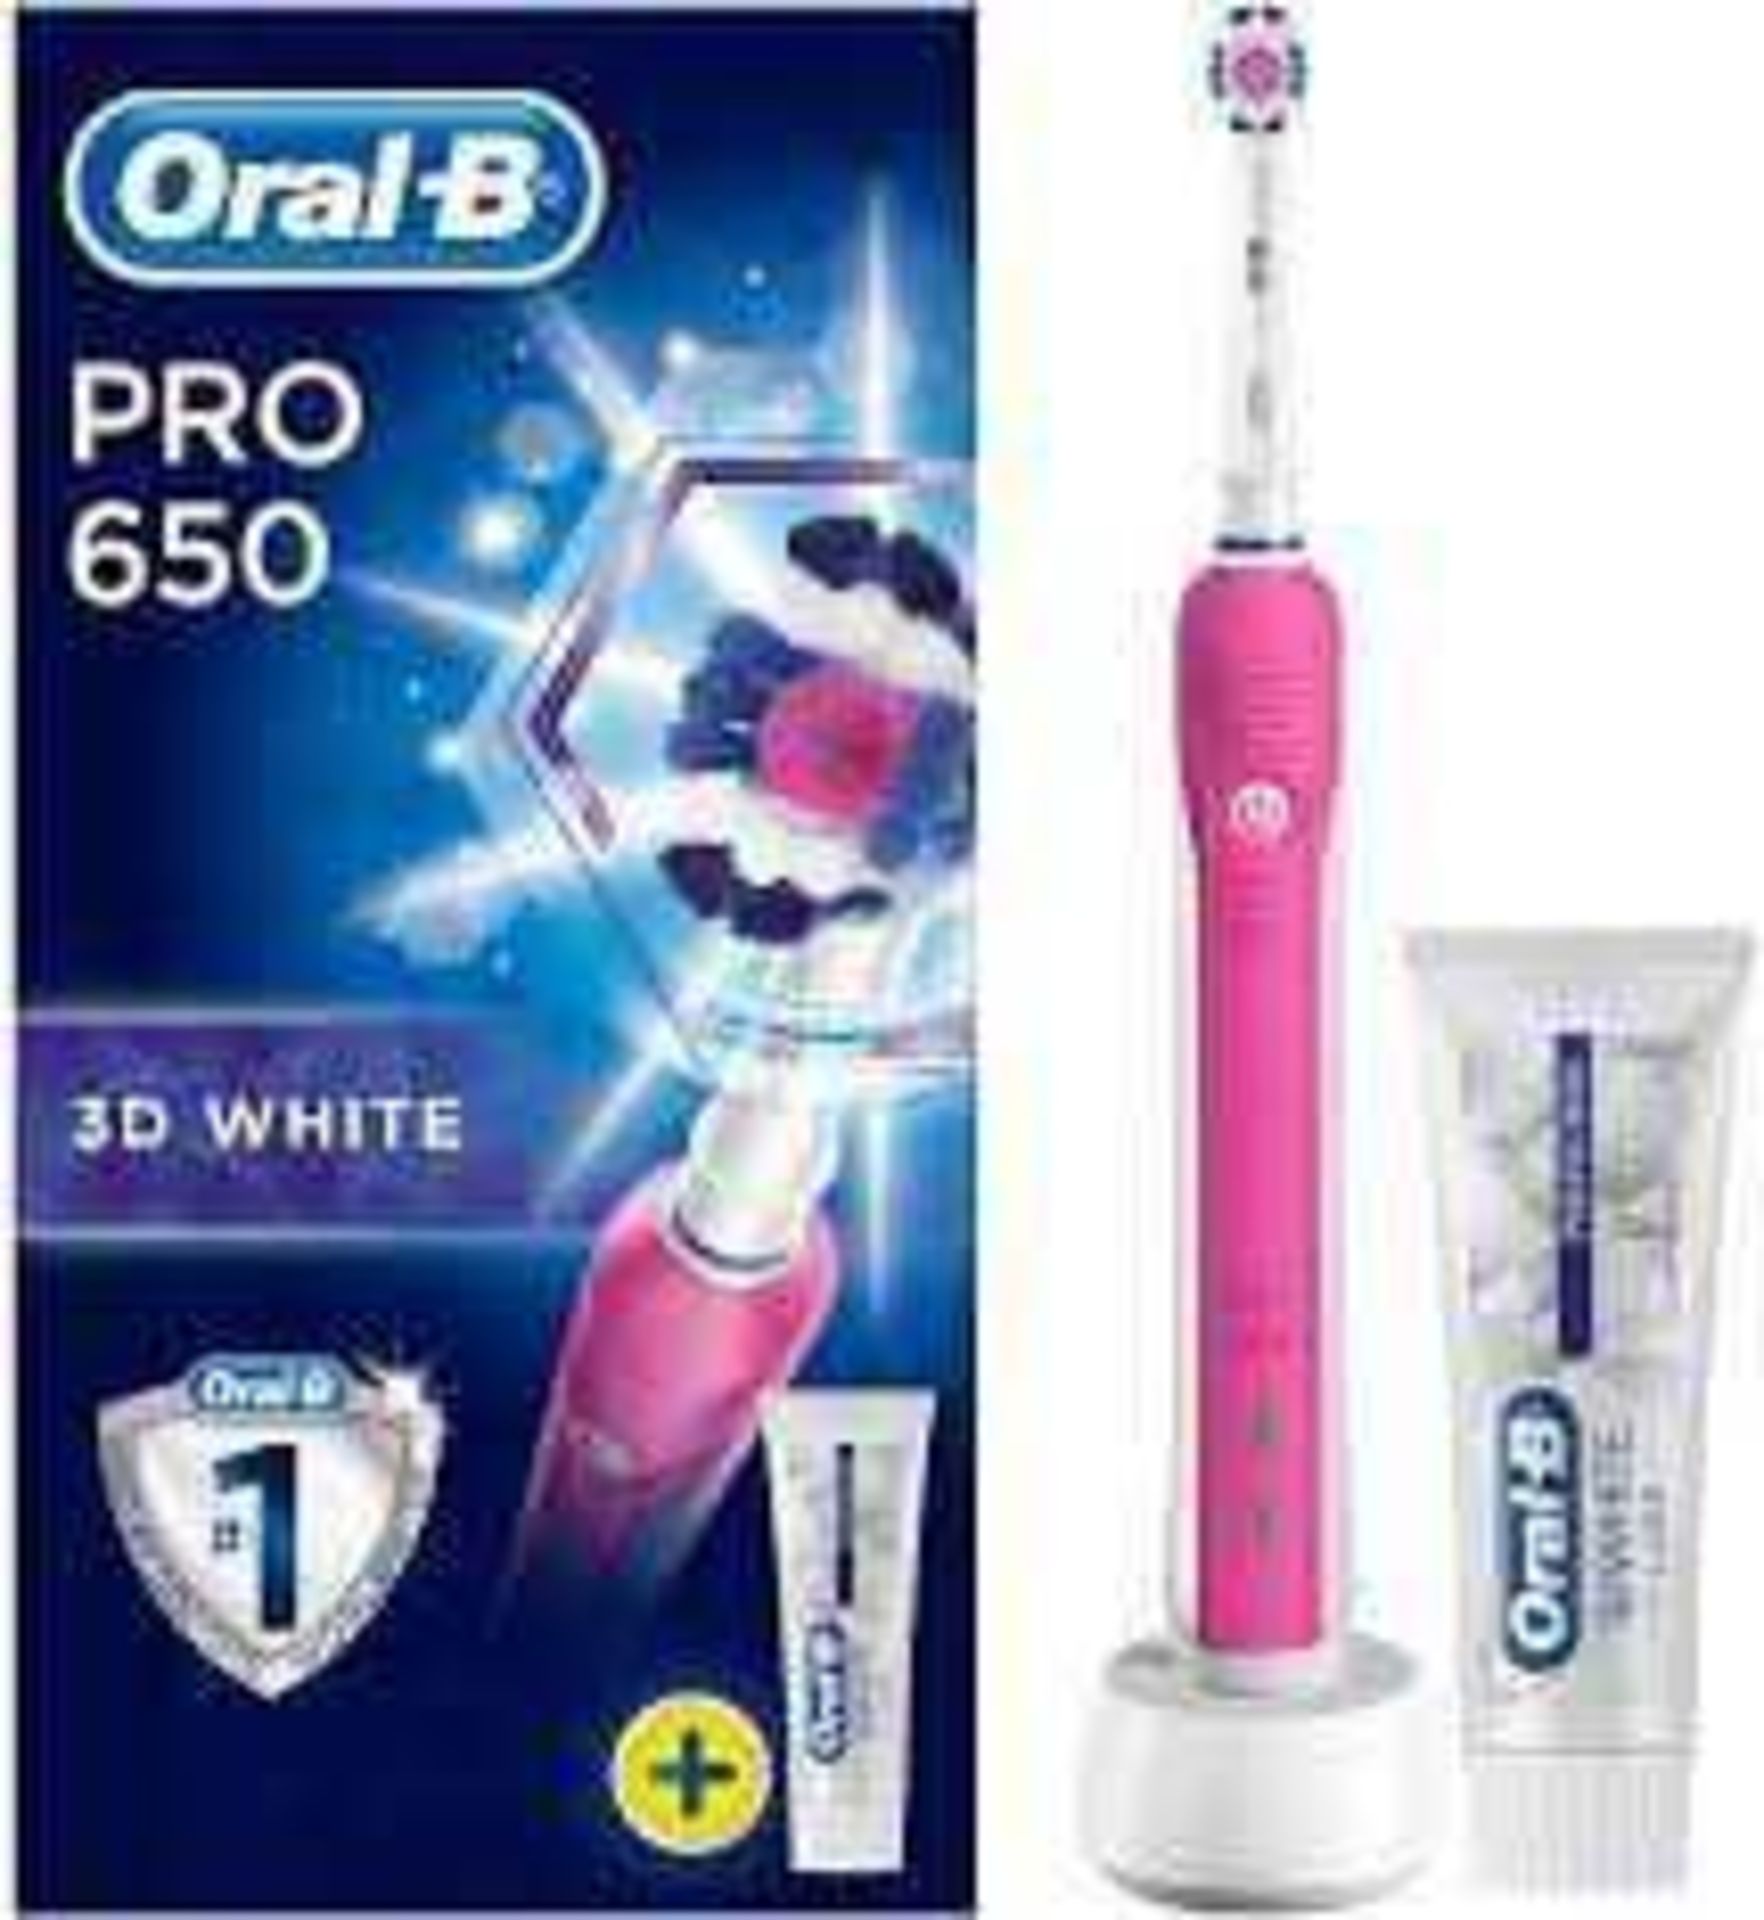 Combined RRP £180 Lot To Contain Three Boxed Oral B Pro 650 3D Action Electric Toothbrushes - Image 2 of 3